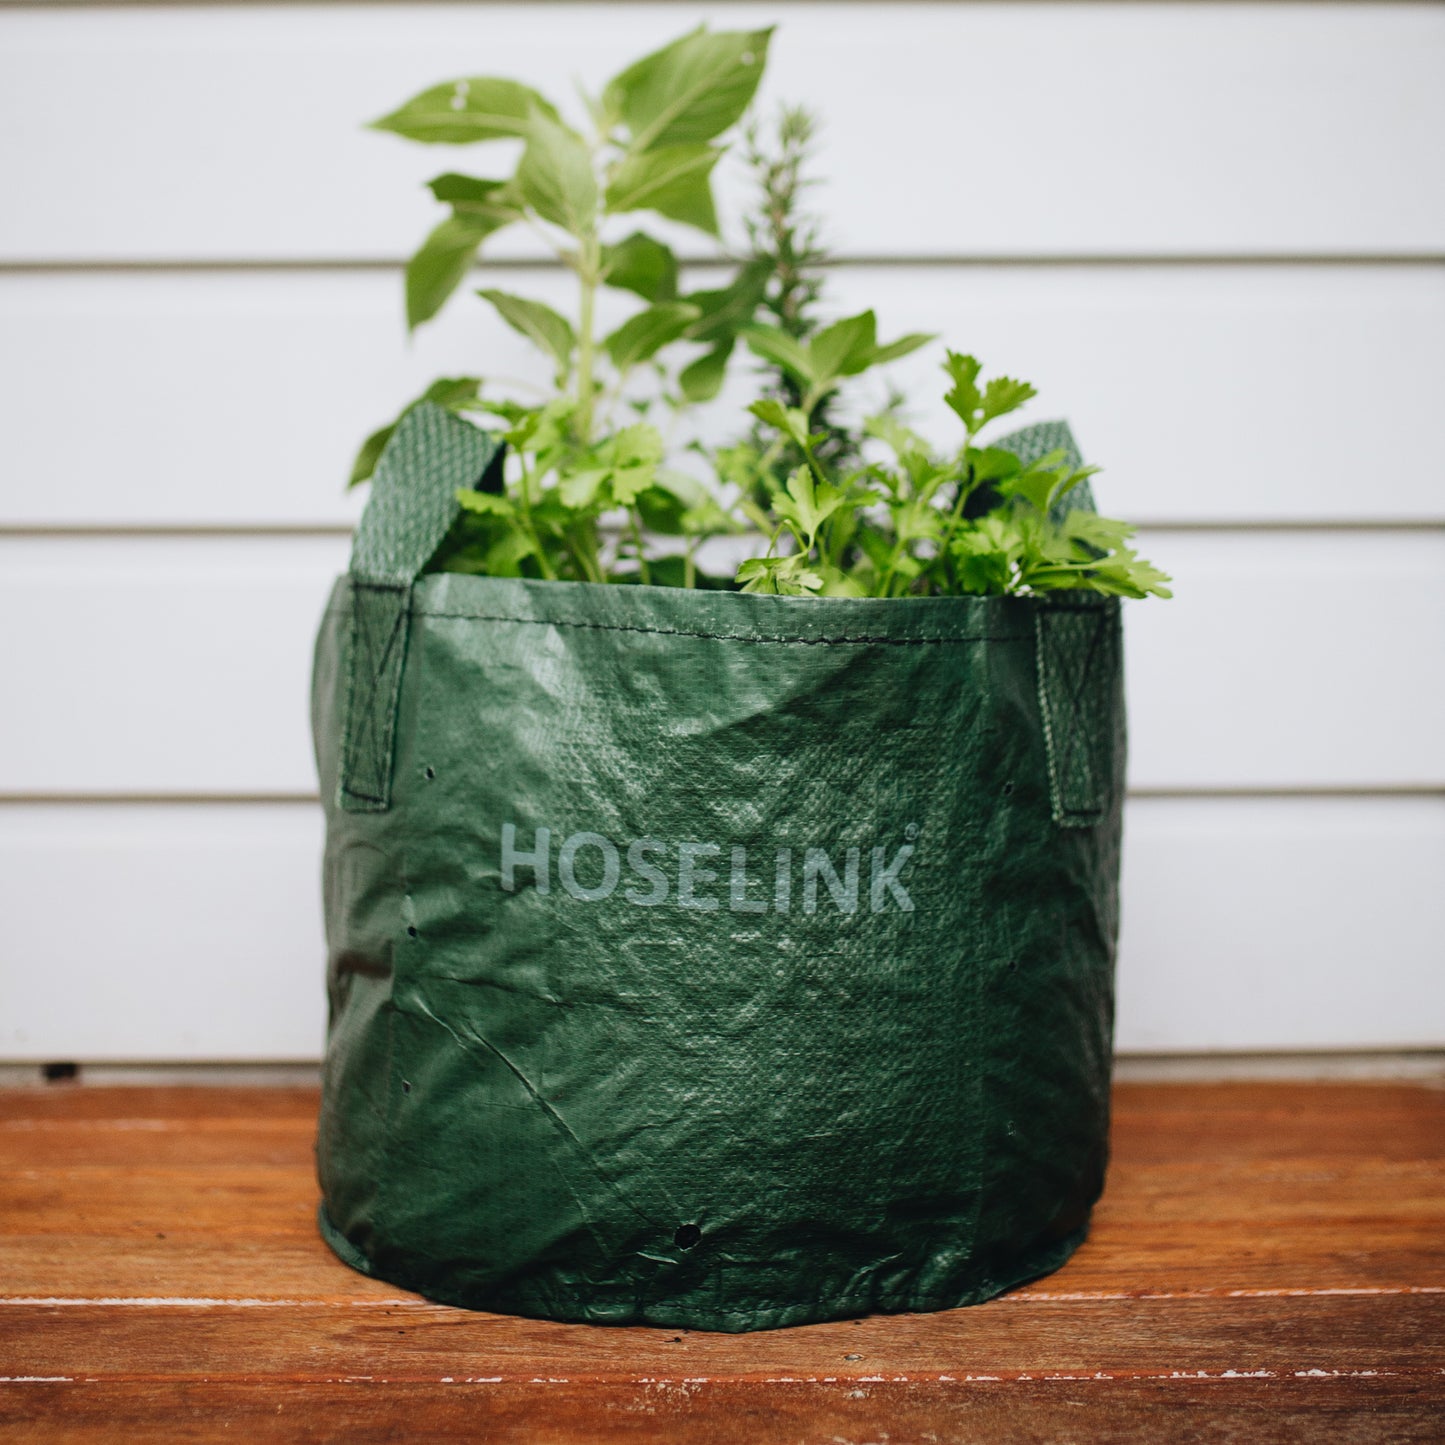 Heavy Duty Planter Bag with plant inside